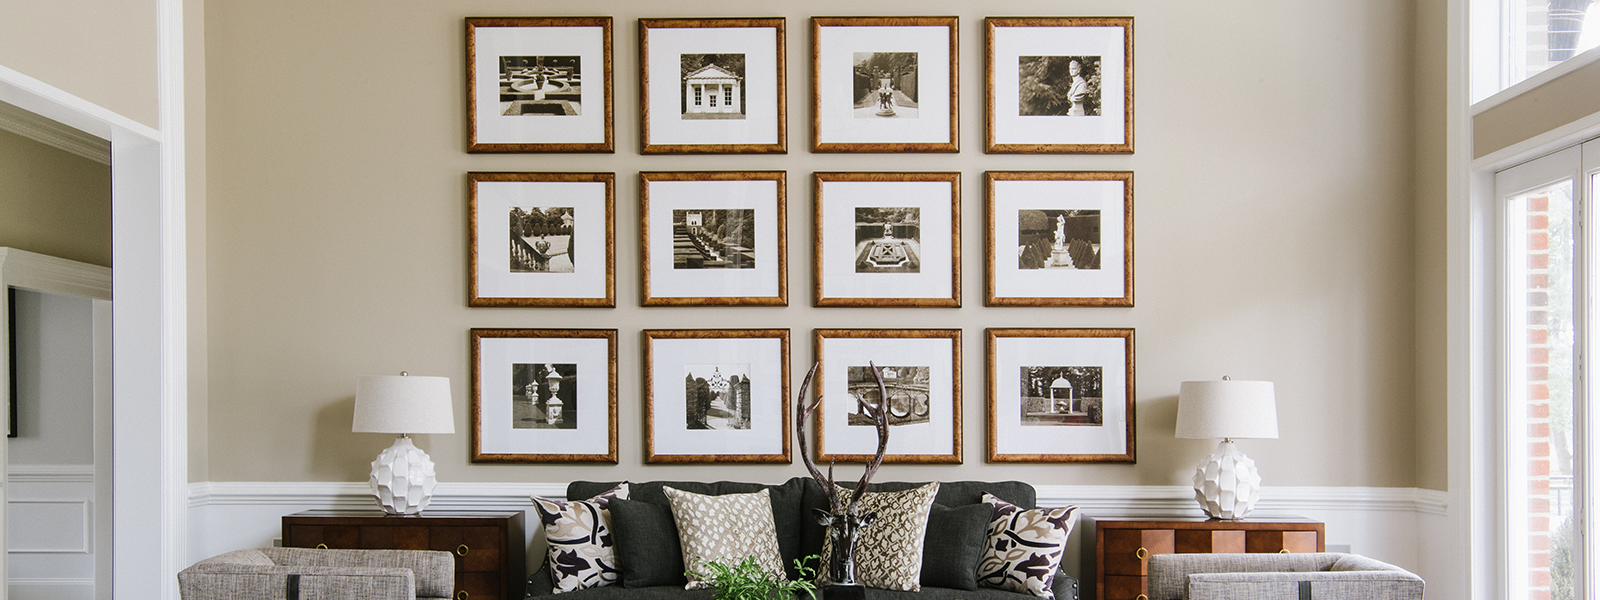 Gallery wall of black & white photos from Bountiful custom framing in Easton, Maryland